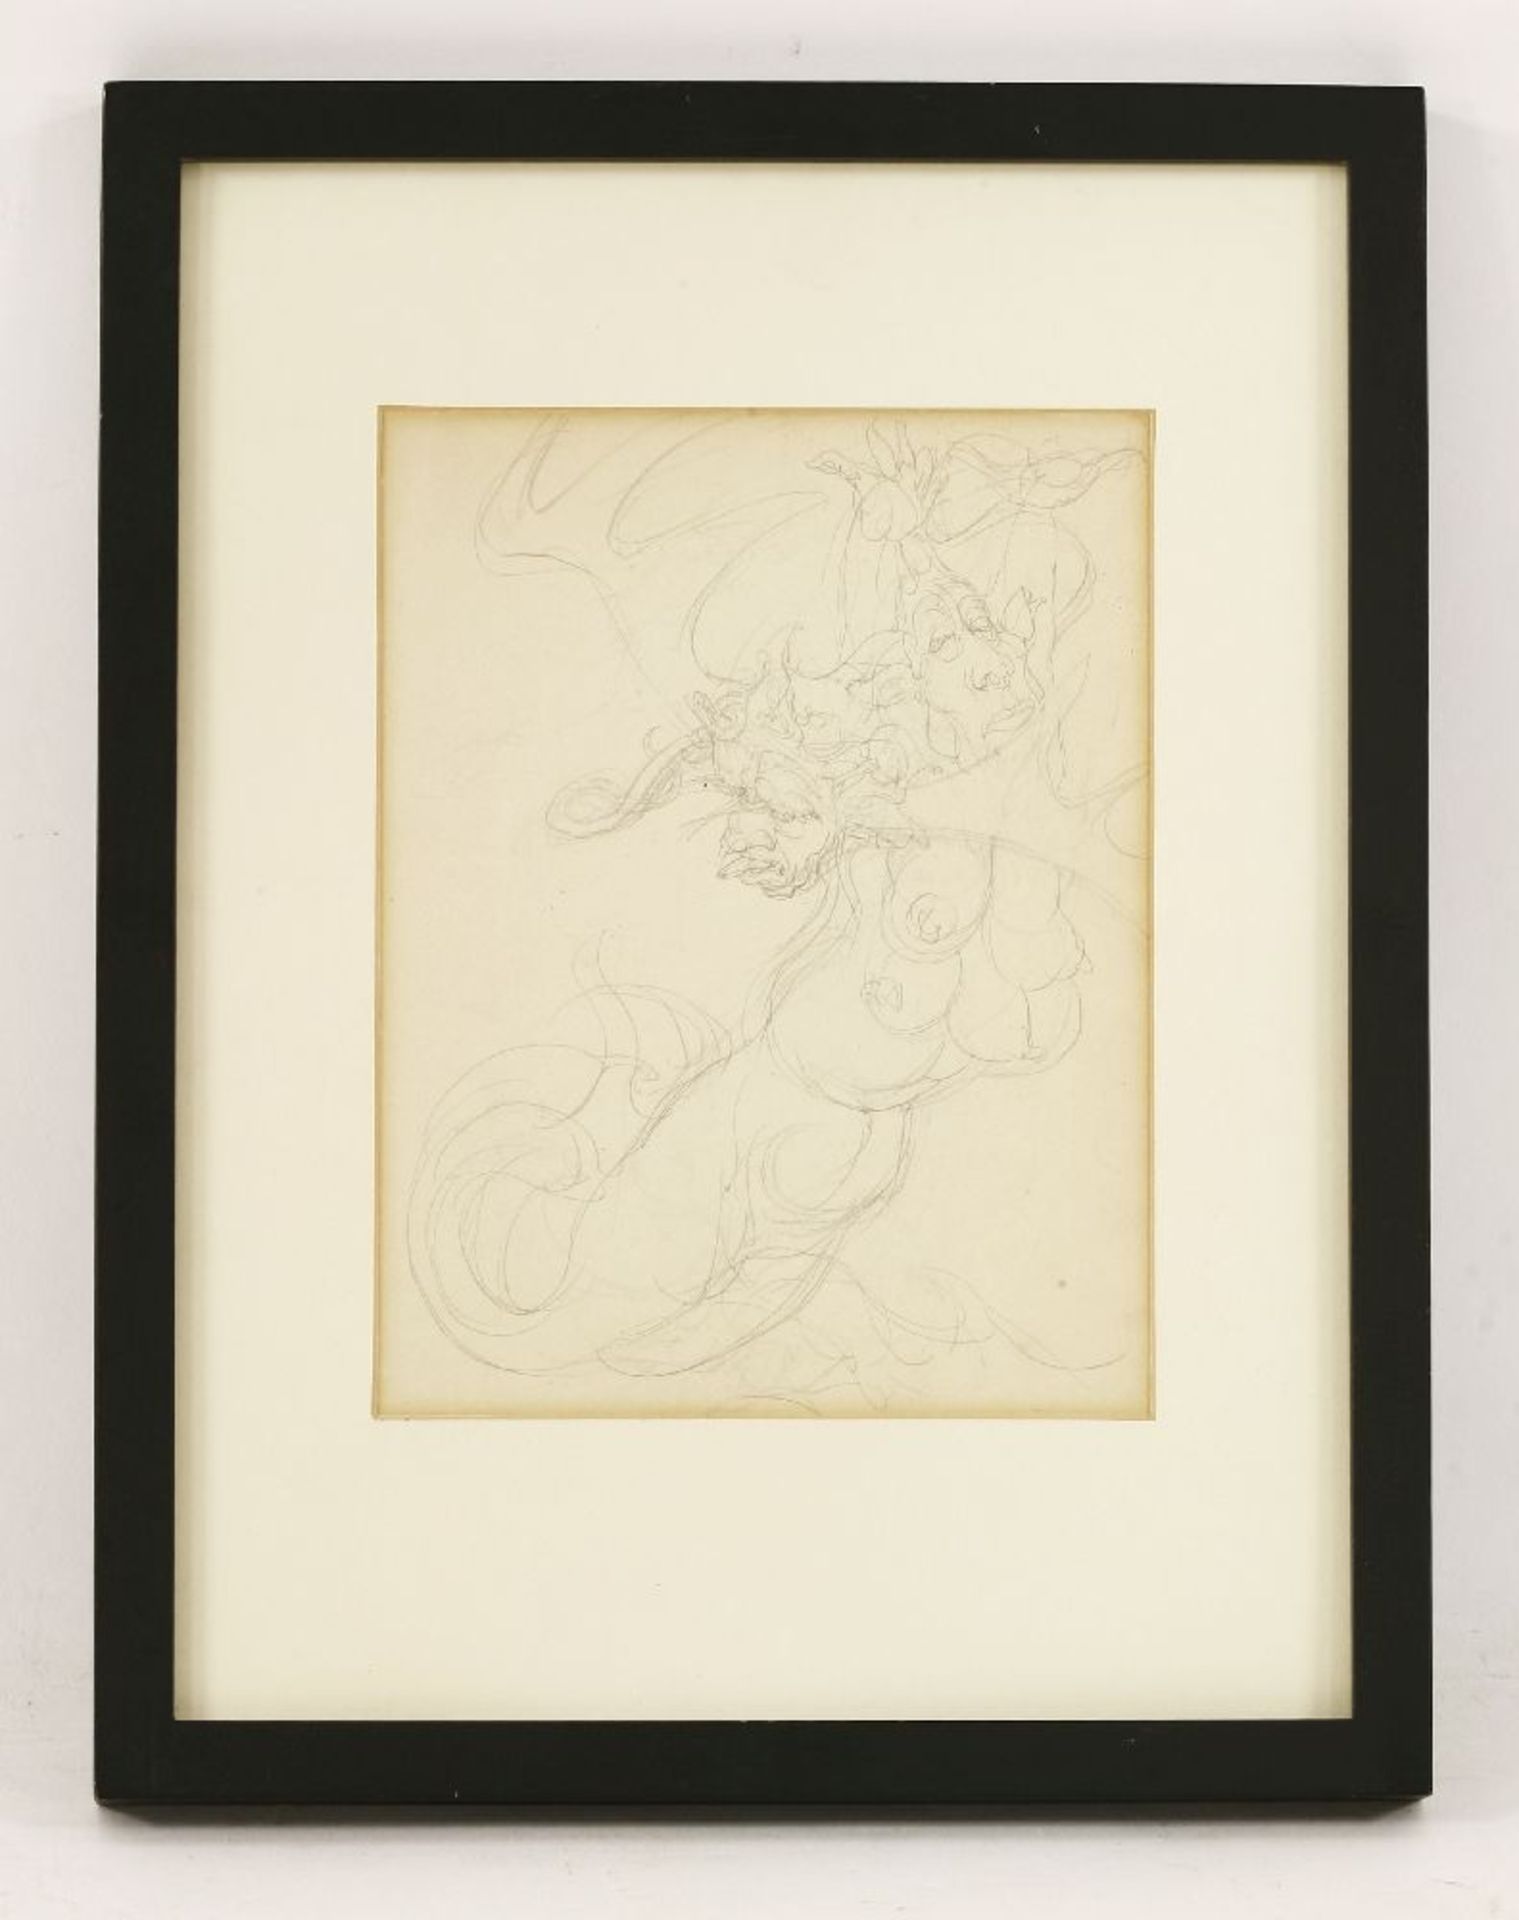 *Austin Osman Spare (1886-1956)'AUTOMATIC DRAWING', from a sketchbook, 1927Pencil25 x 19cm*Artist' - Image 2 of 3